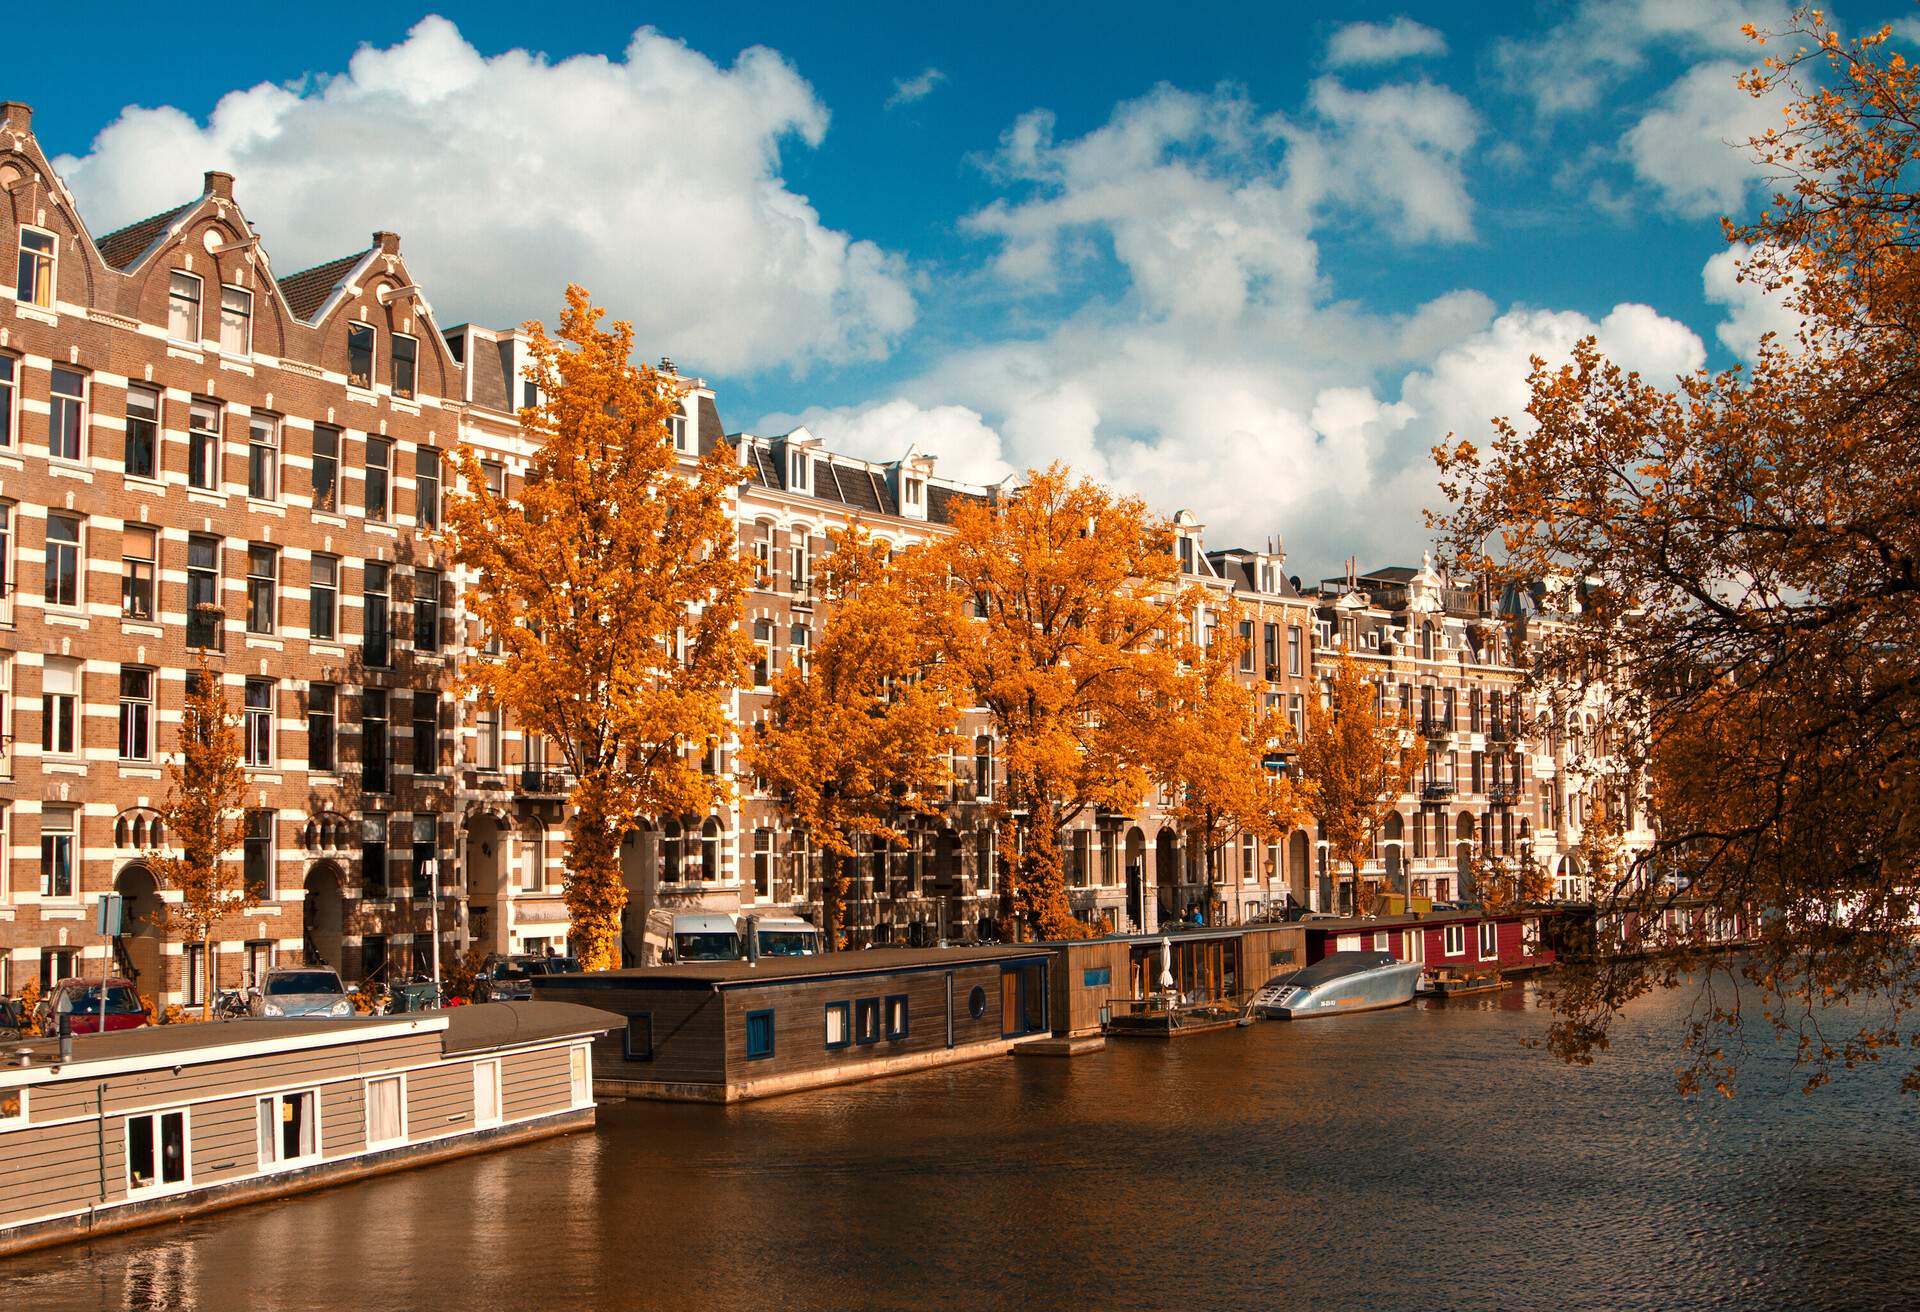 Houseboats on the canal close to a row of autumn-coloured trees and brown adjacent buildings.